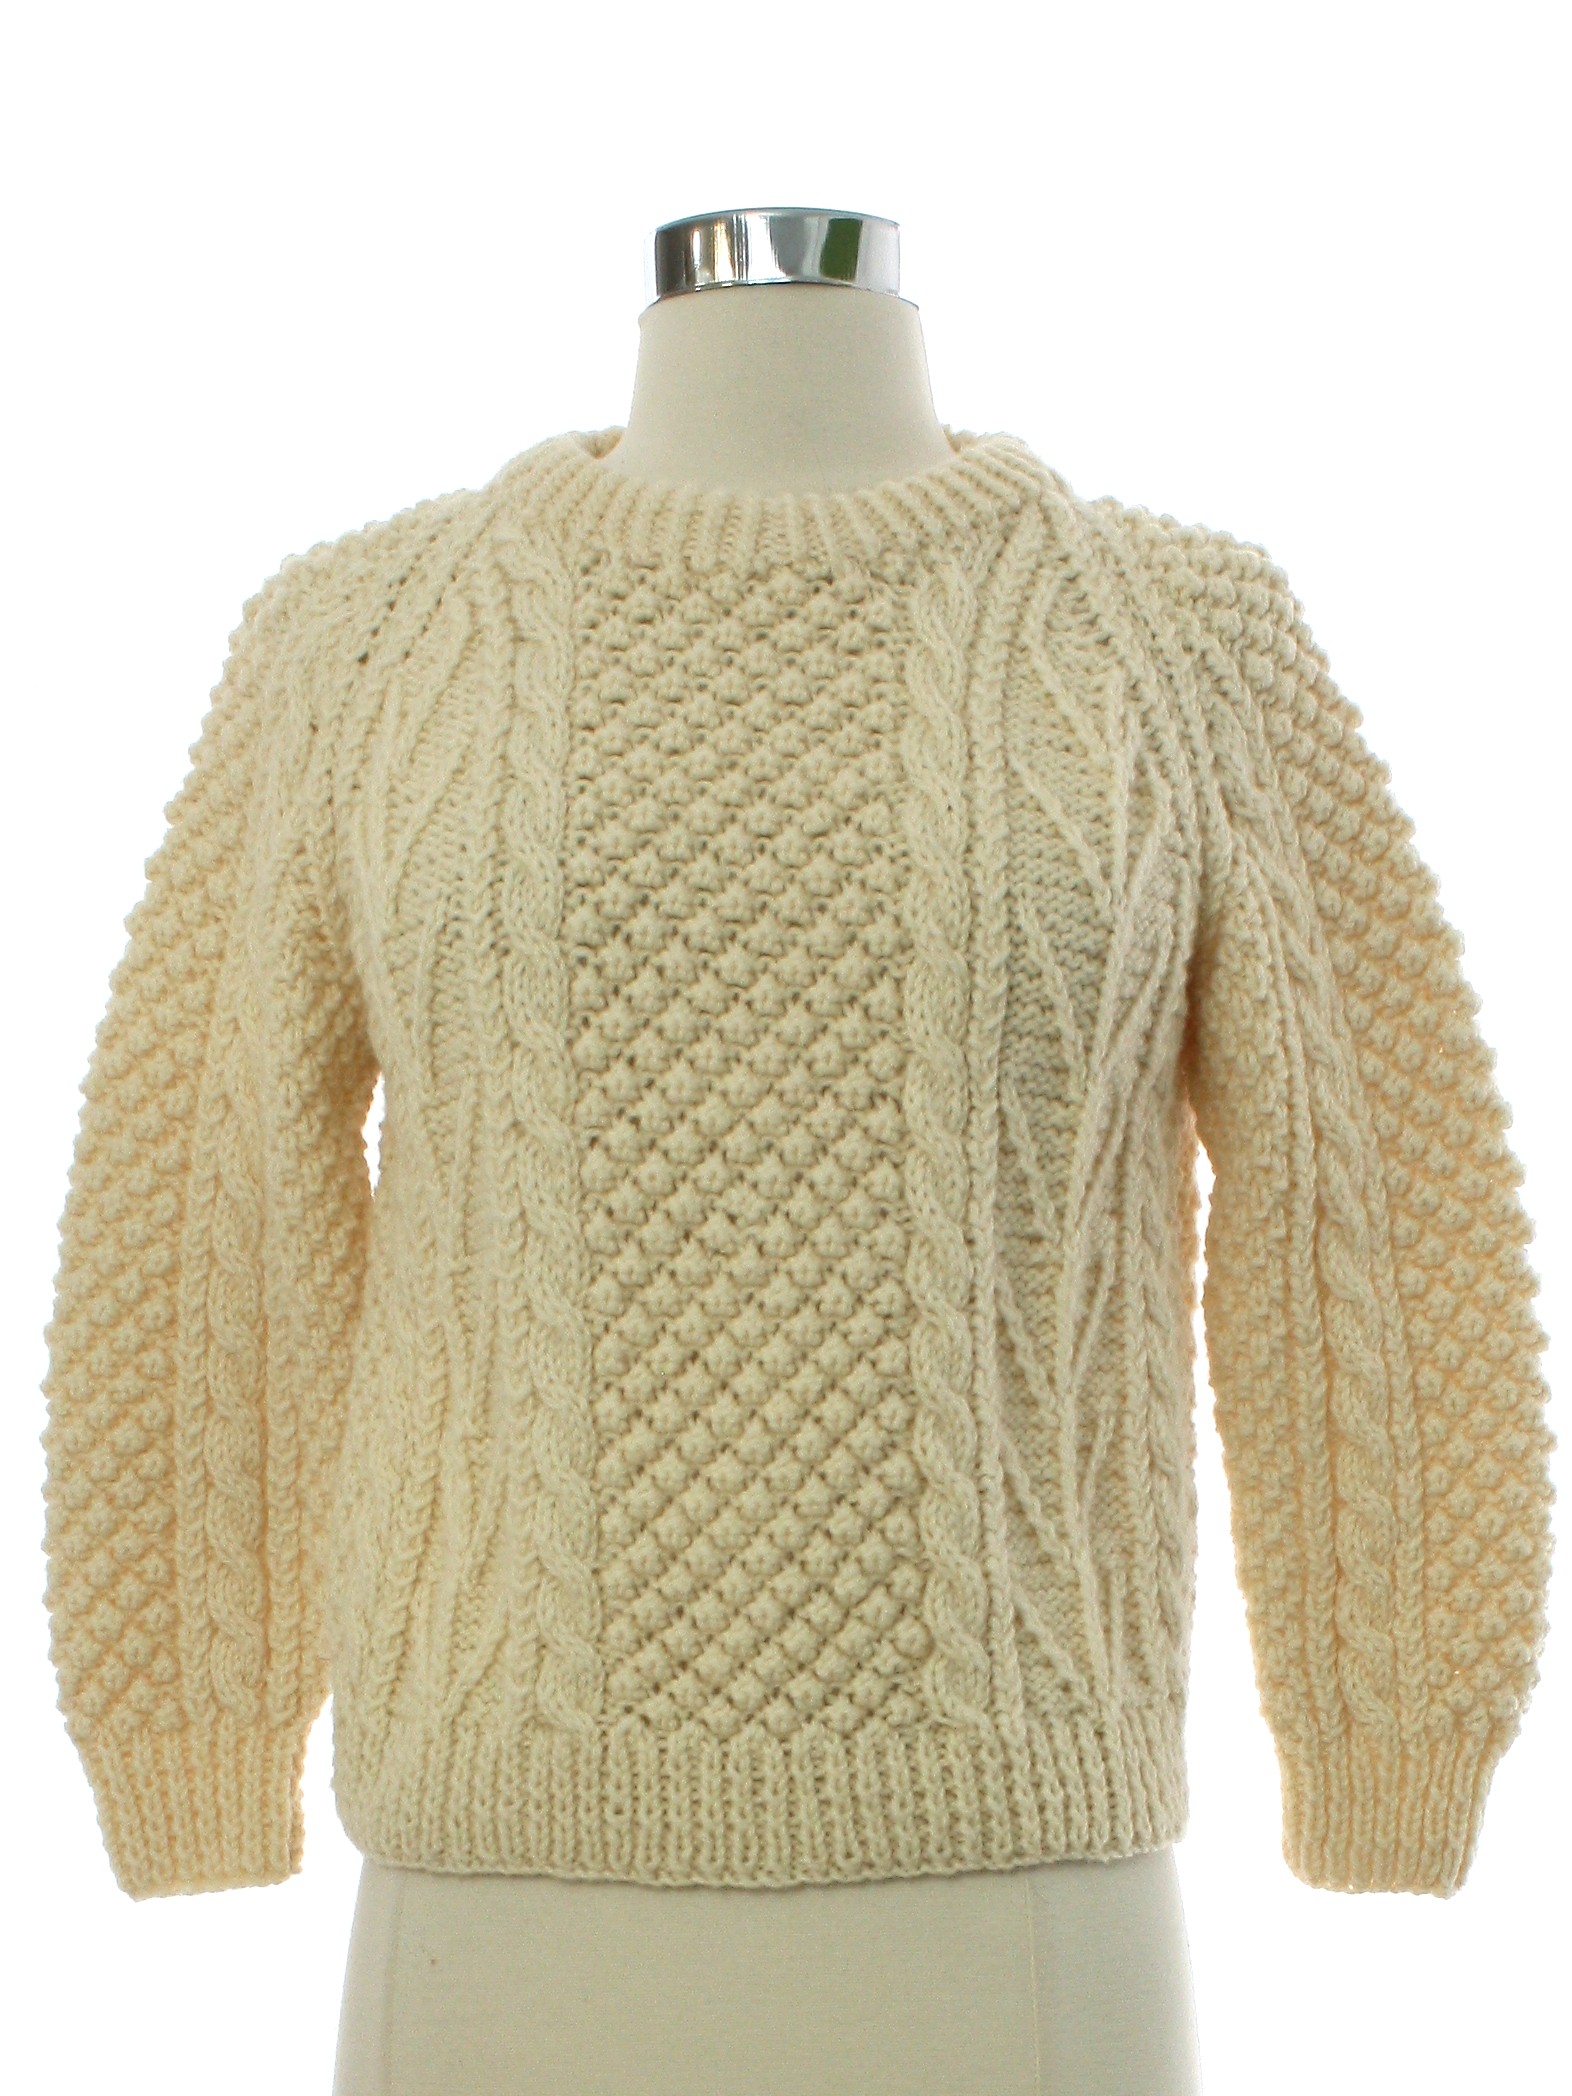 Retro 80s Sweater (Carrick Fin, Handknitted in Donegal) : 80s -Carrick ...